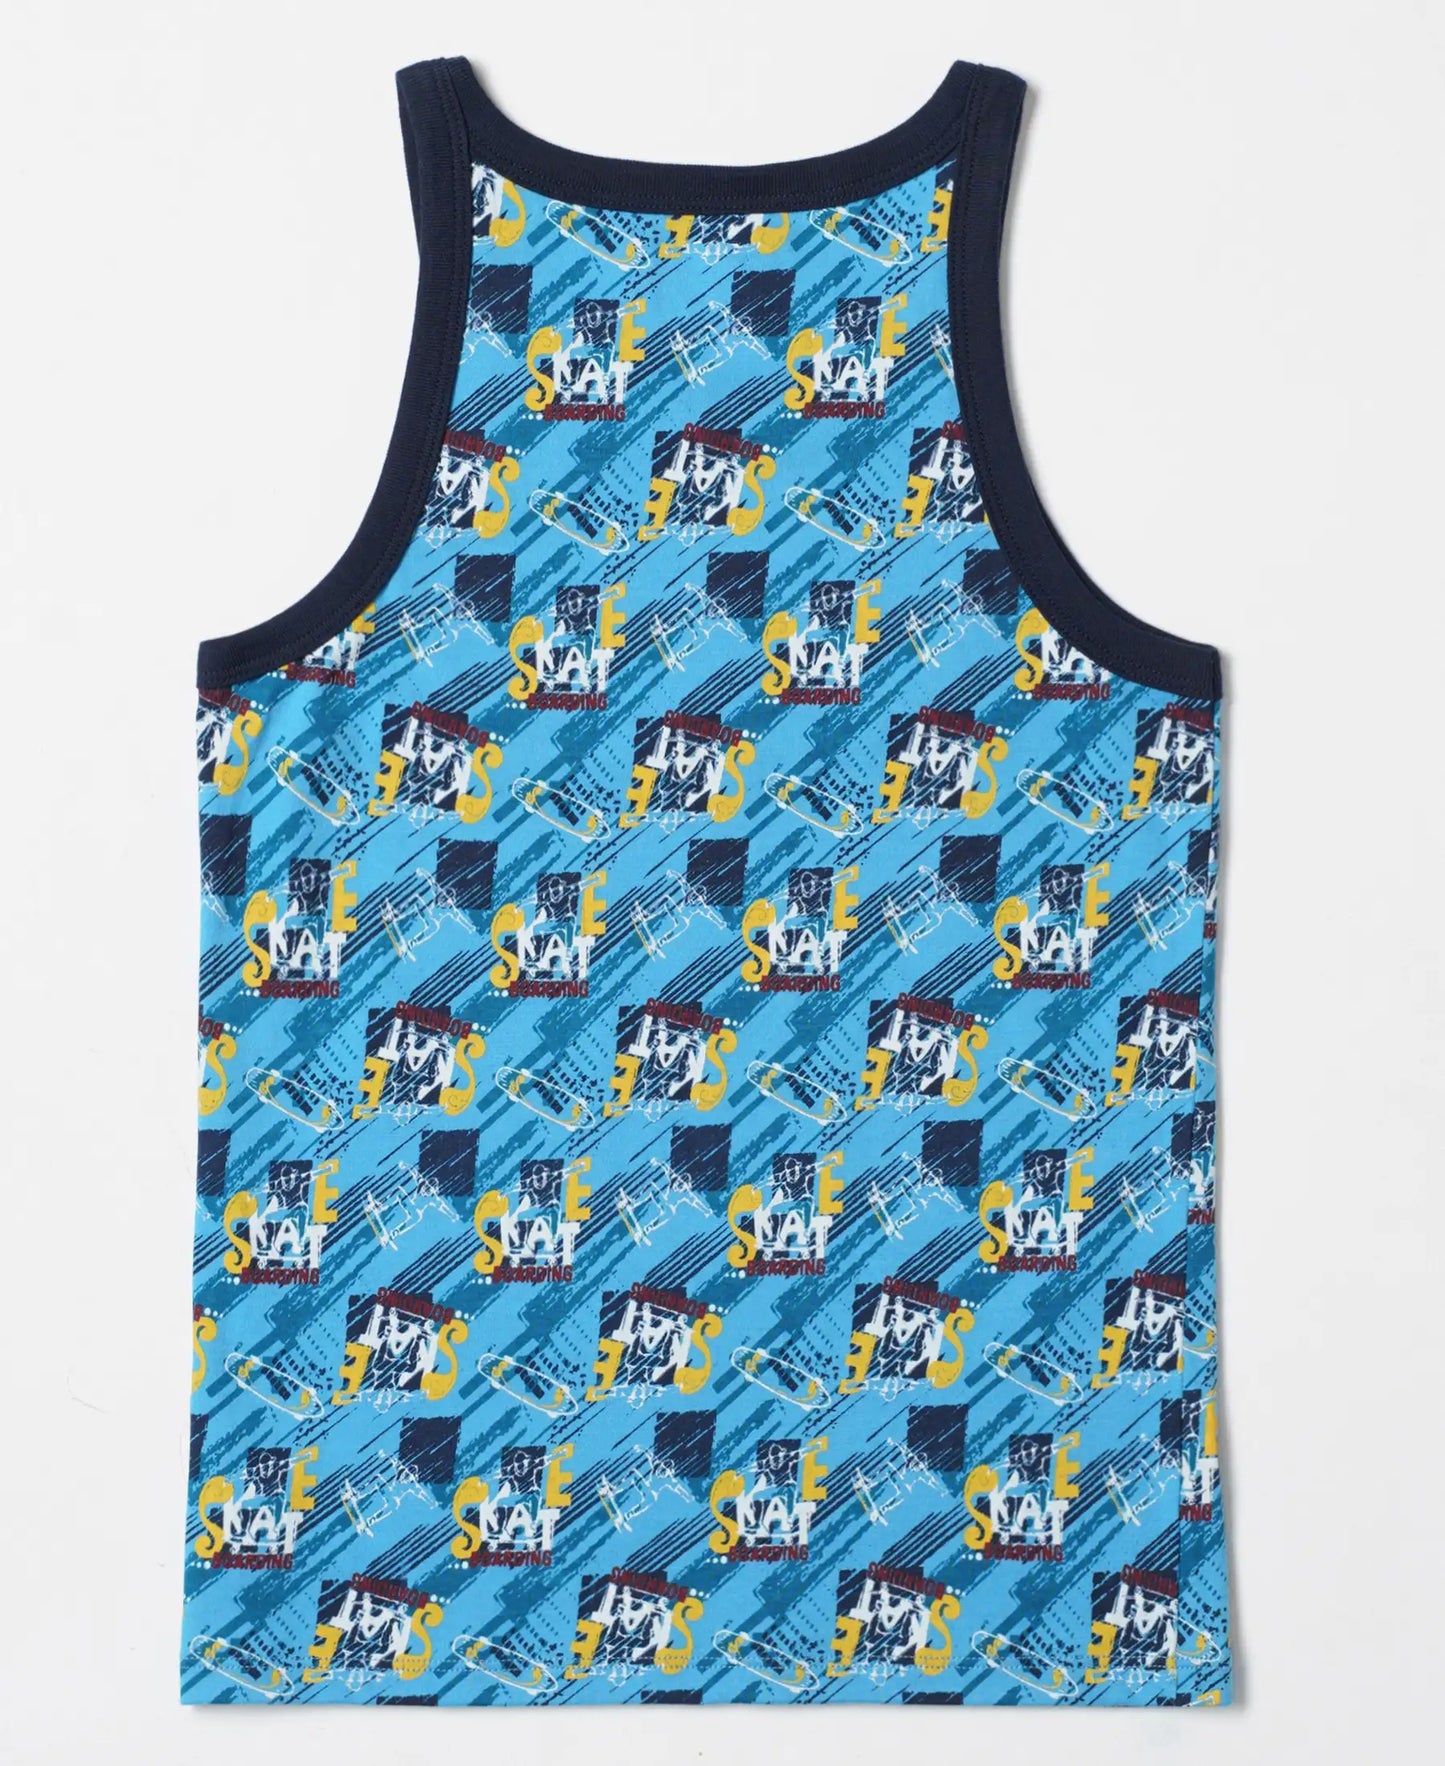 Super Combed Cotton Printed Round Neck Sleeveless Vest - Assorted-4